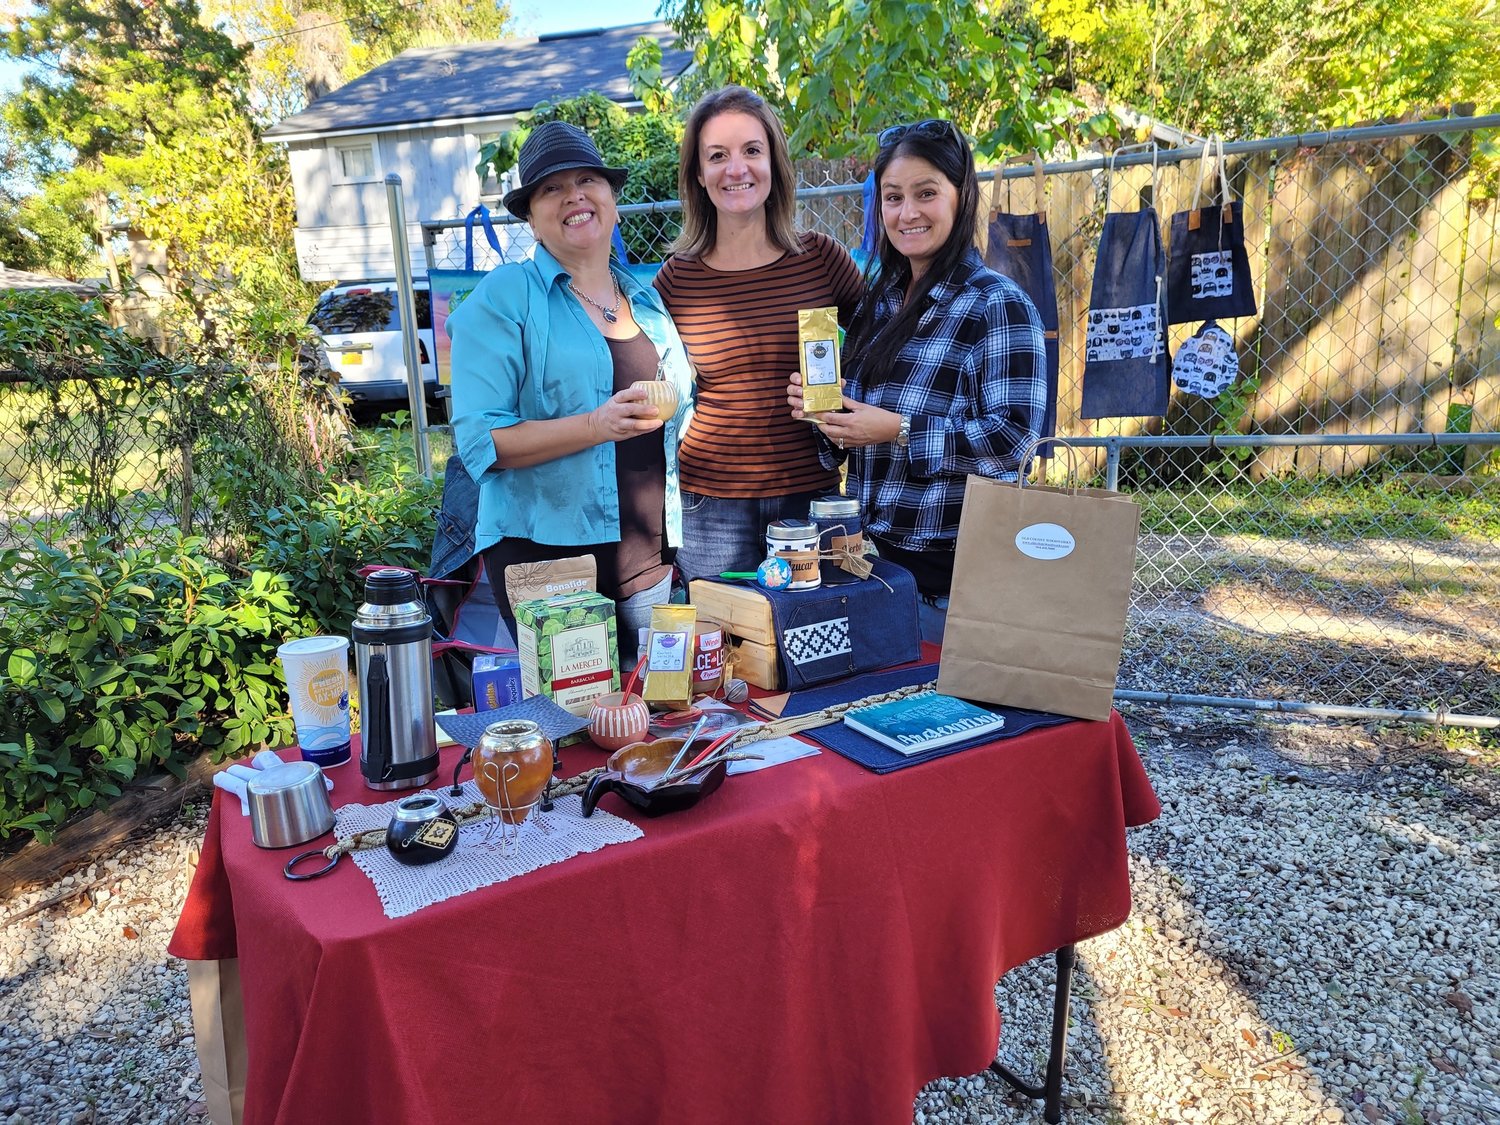 Dr. Carla Rodrigues, second from left, and vendors at the Artisans Market fundraiser for Celestial Farms.